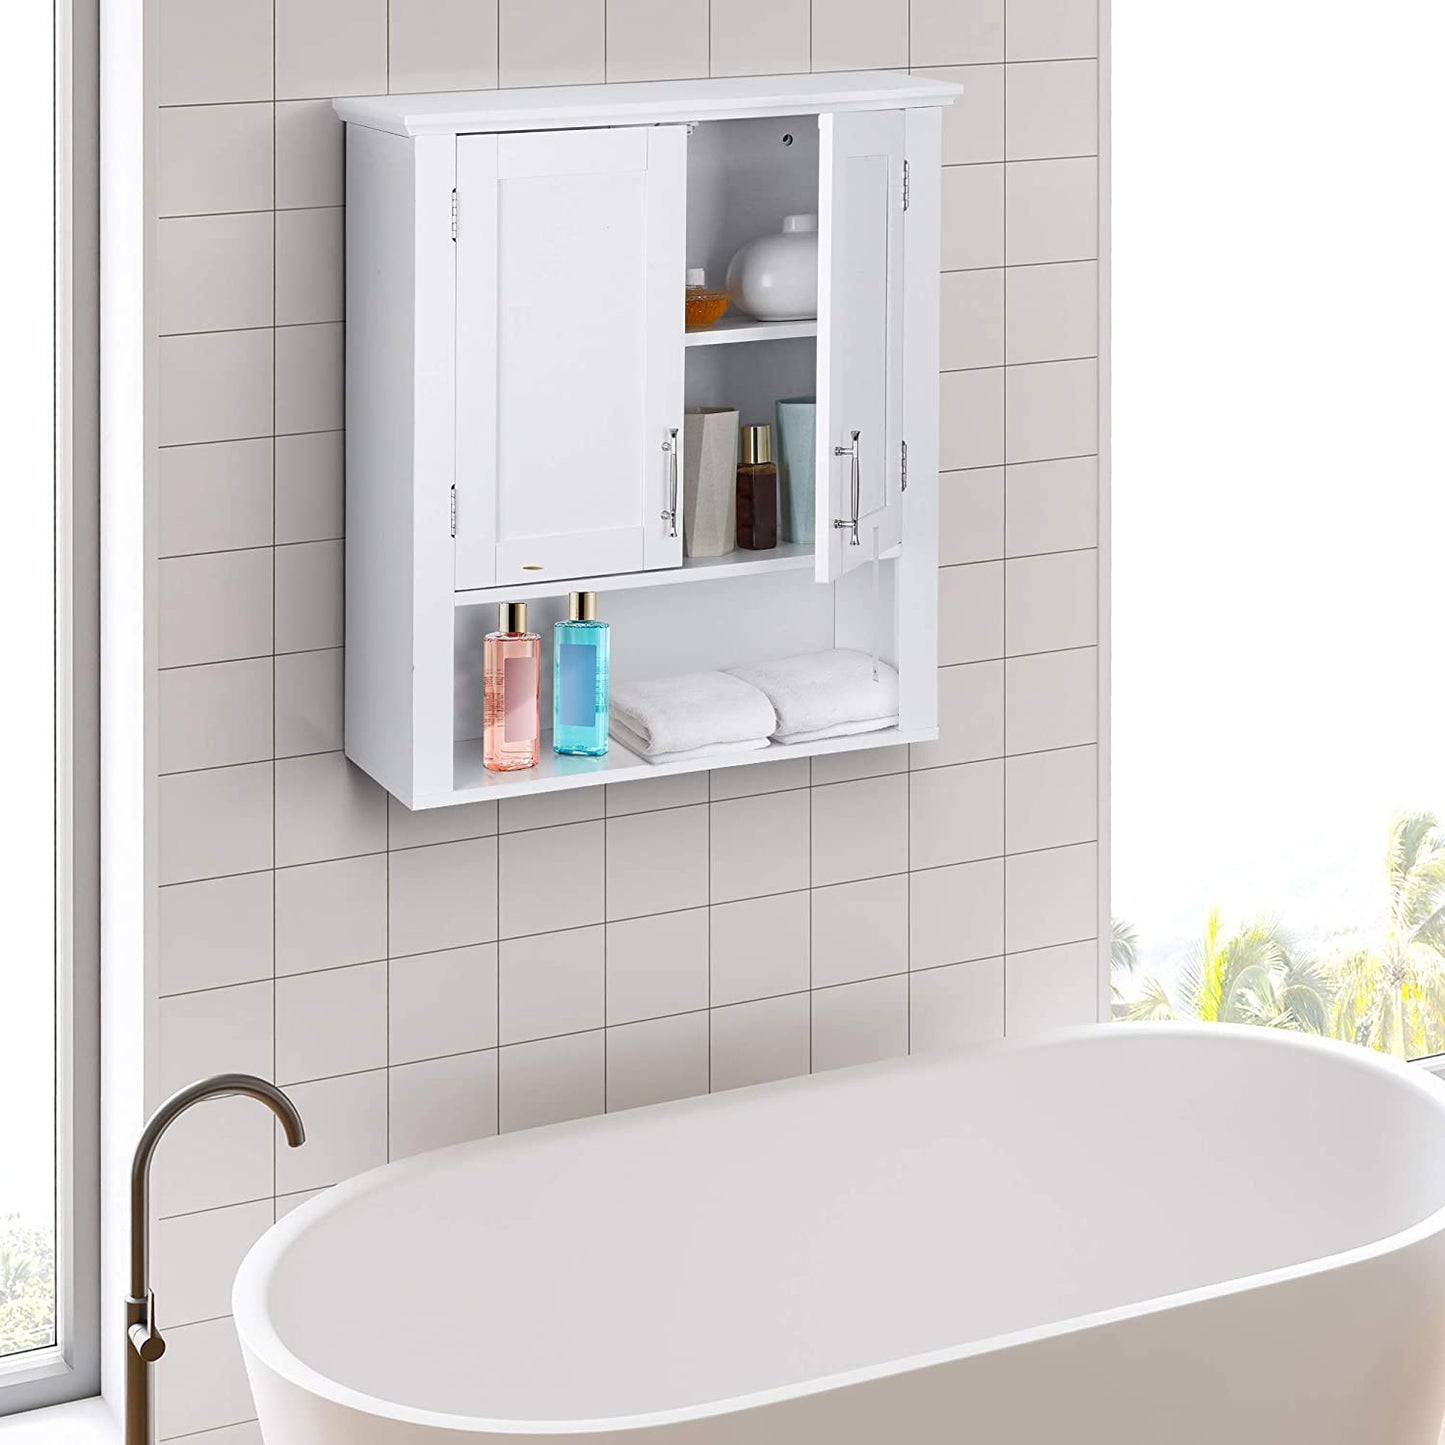 Hanging Bathroom Cabinet with Doors, Wall Cabinets Over The Toilet, Bathroom Wood Hanging Cabinet, White